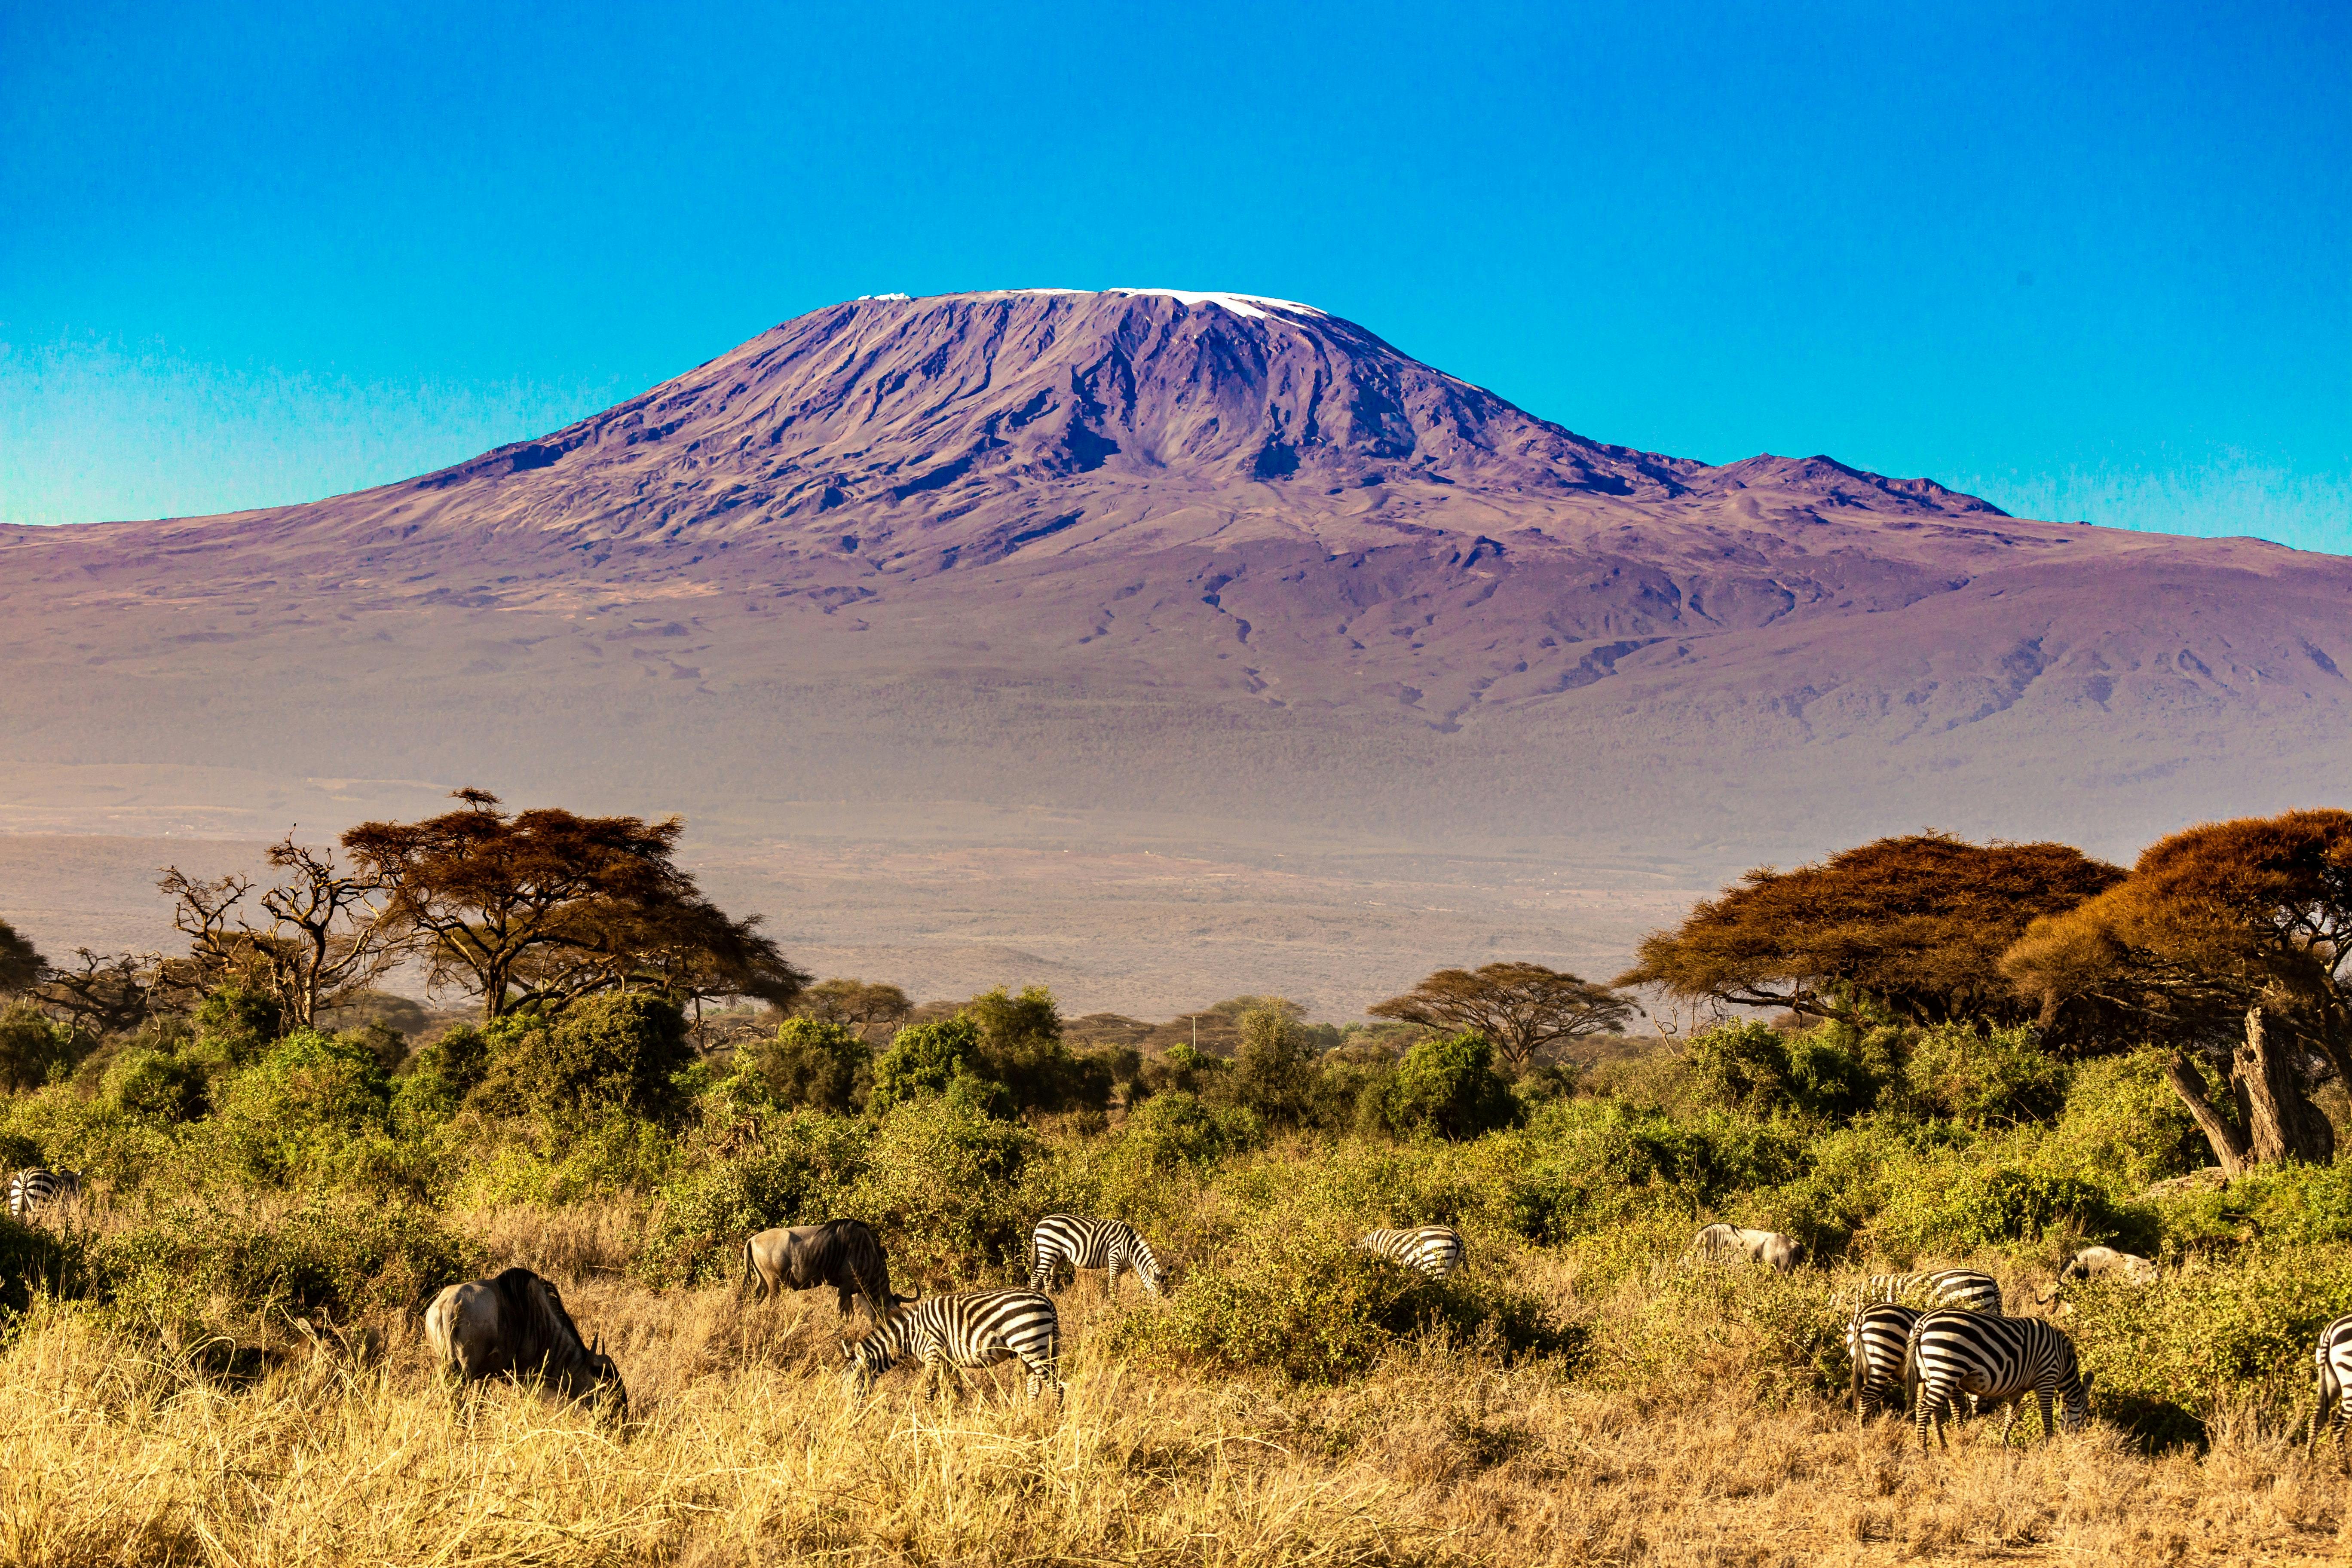 How to get to Kilimanjaro